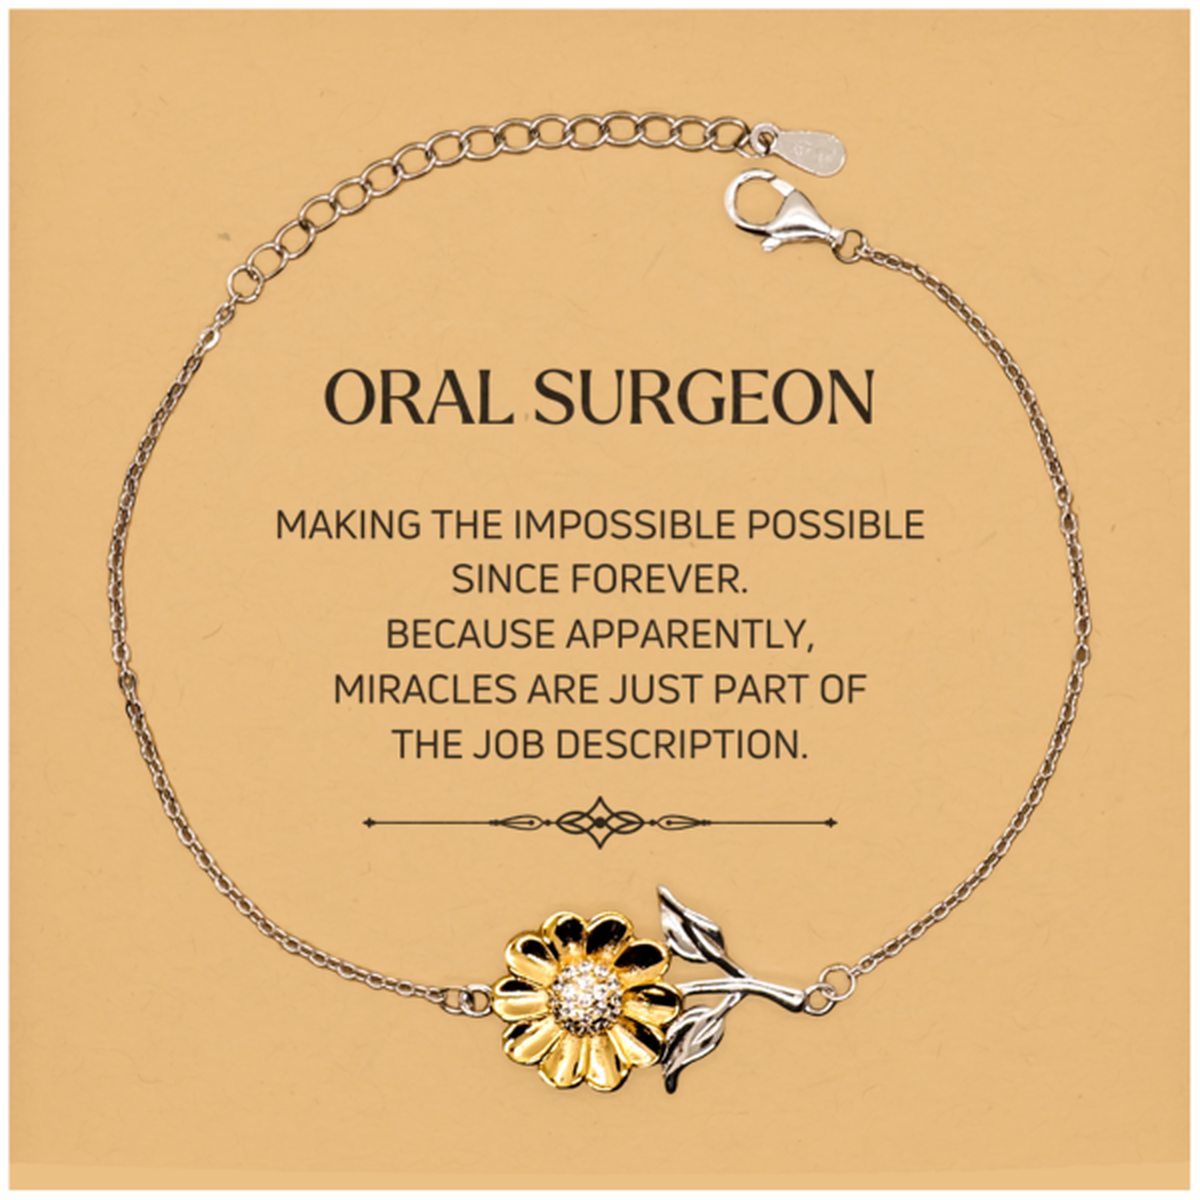 Funny Oral Surgeon Gifts, Miracles are just part of the job description, Inspirational Birthday Christmas Sunflower Bracelet For Oral Surgeon, Men, Women, Coworkers, Friends, Boss